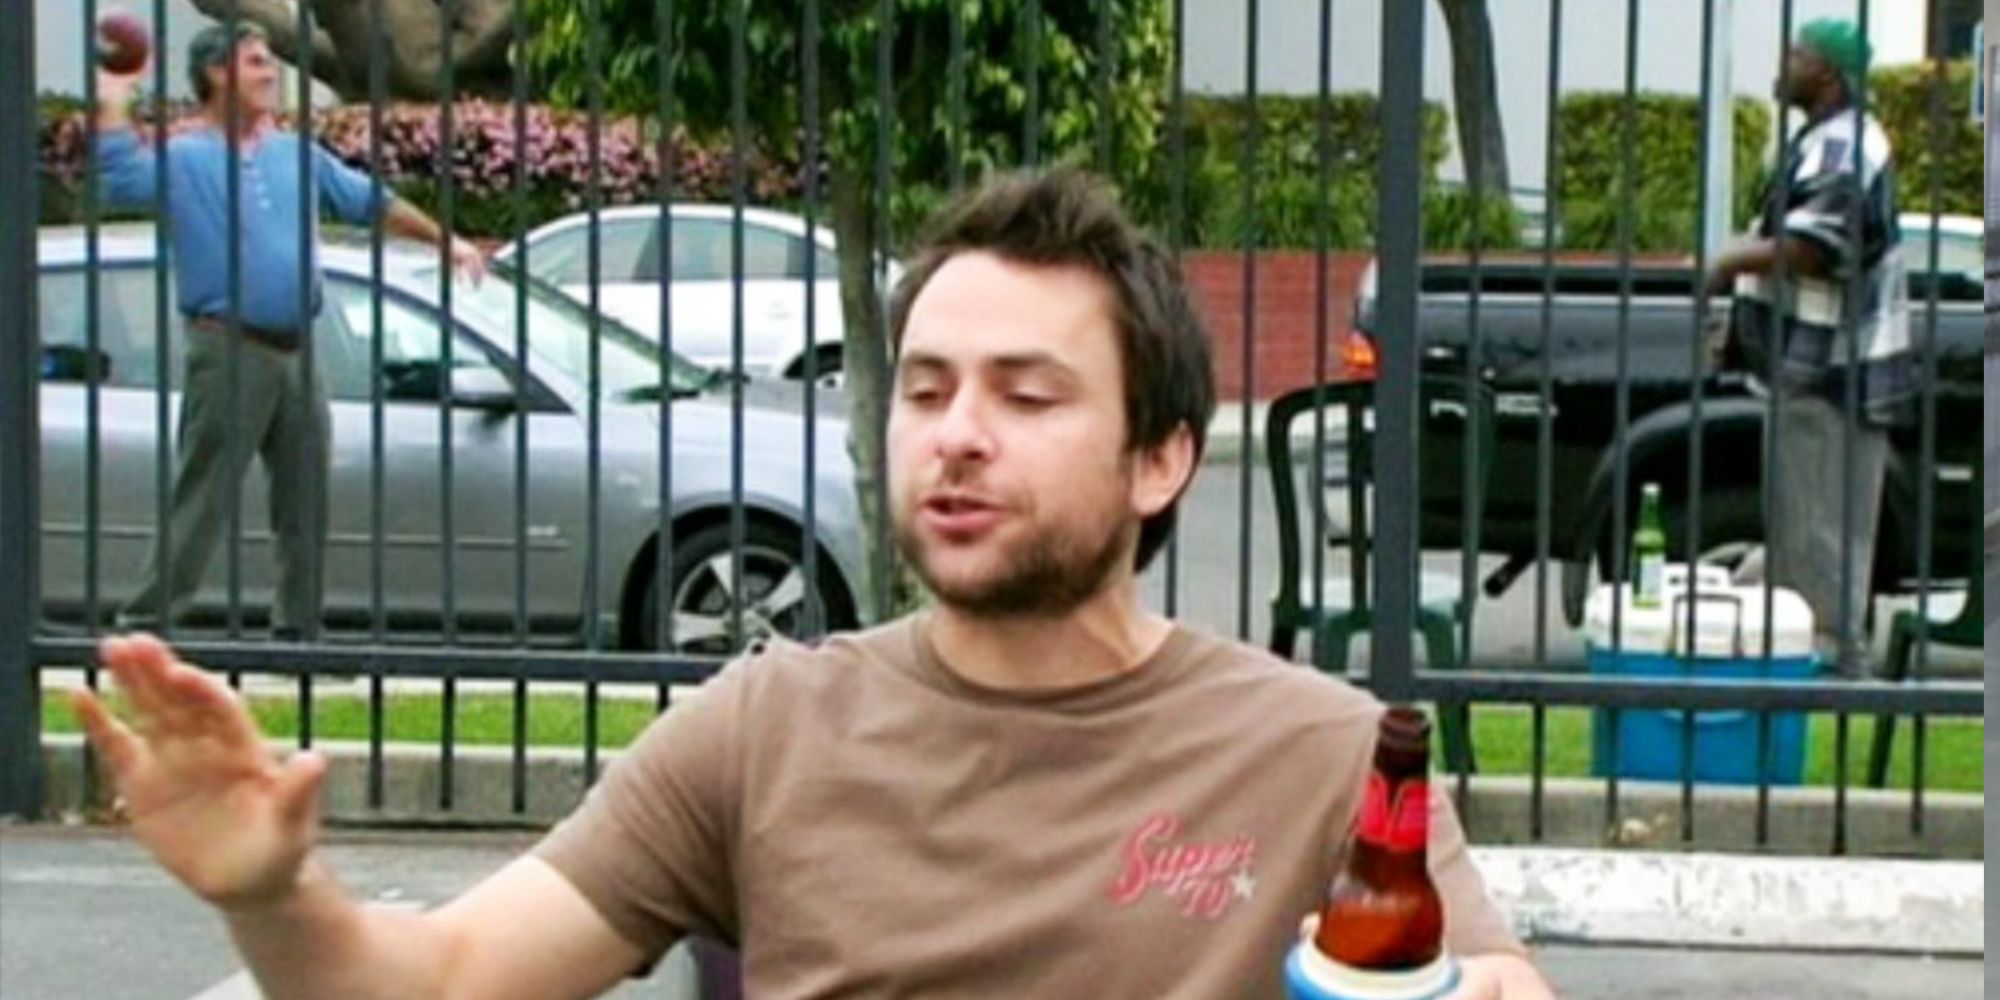 Charlie drinking at tailgate on it's always sunny in philadelphia